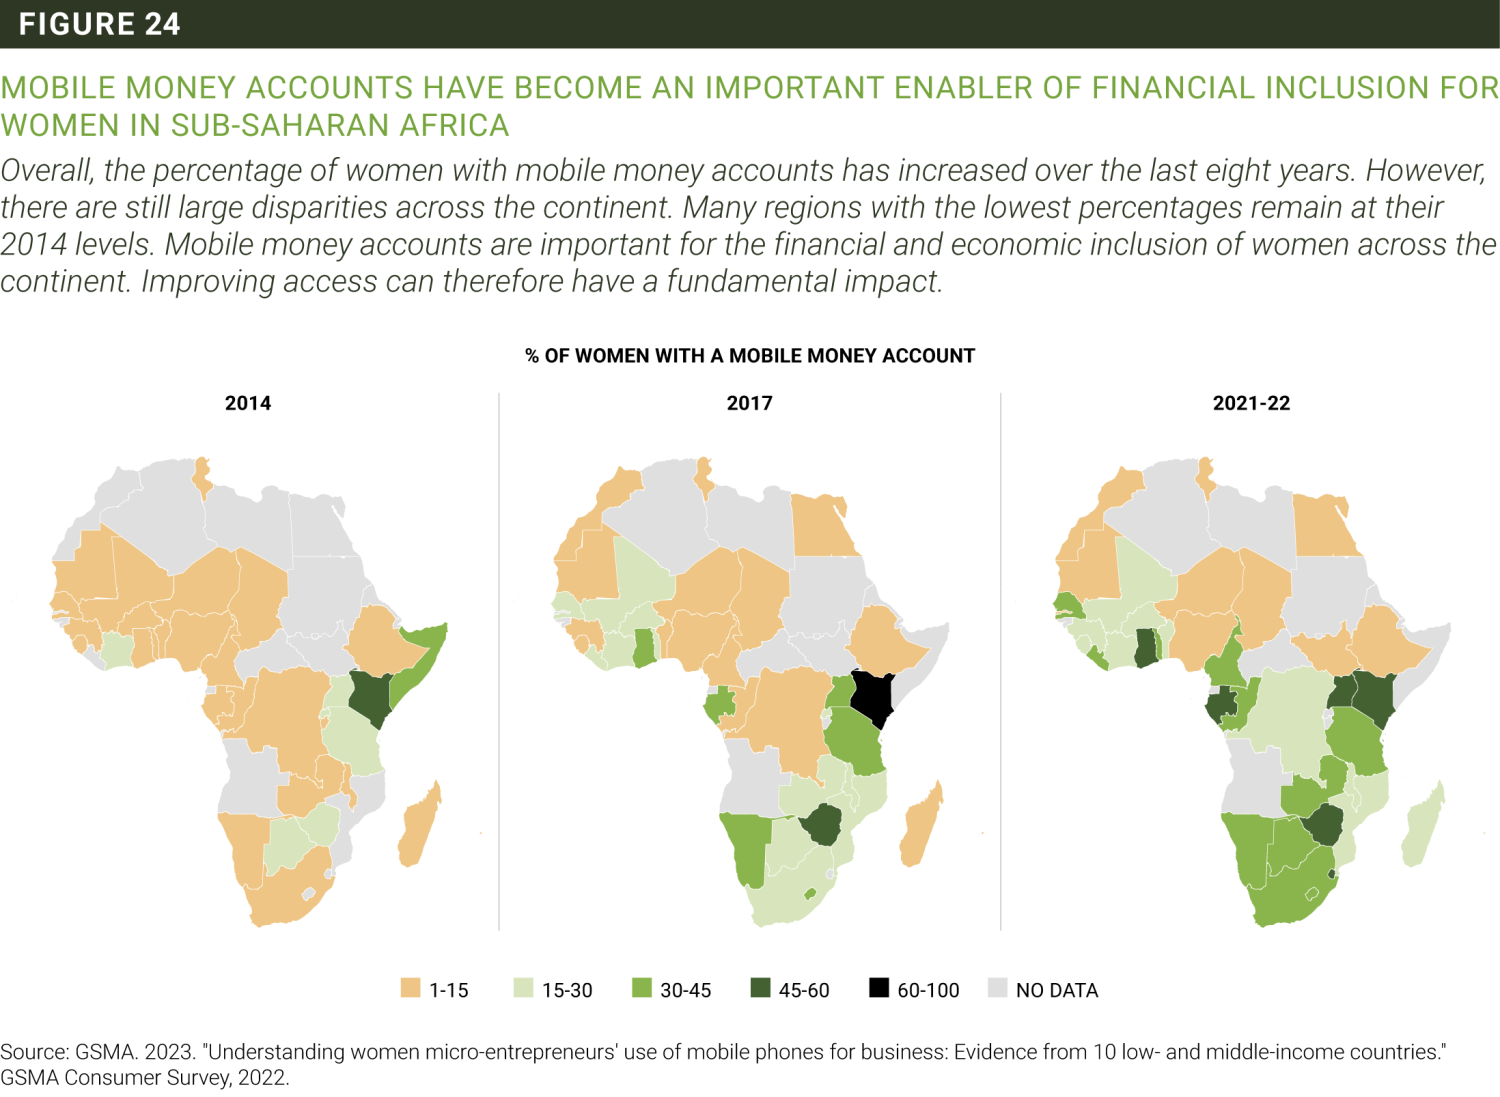 MOBILE MONEY ACCOUNTS HAVE BECOME AN IMPORTANT ENABLER OF FINANCIAL INCLUSION FOR WOMEN IN SUB-SAHARAN AFRICA